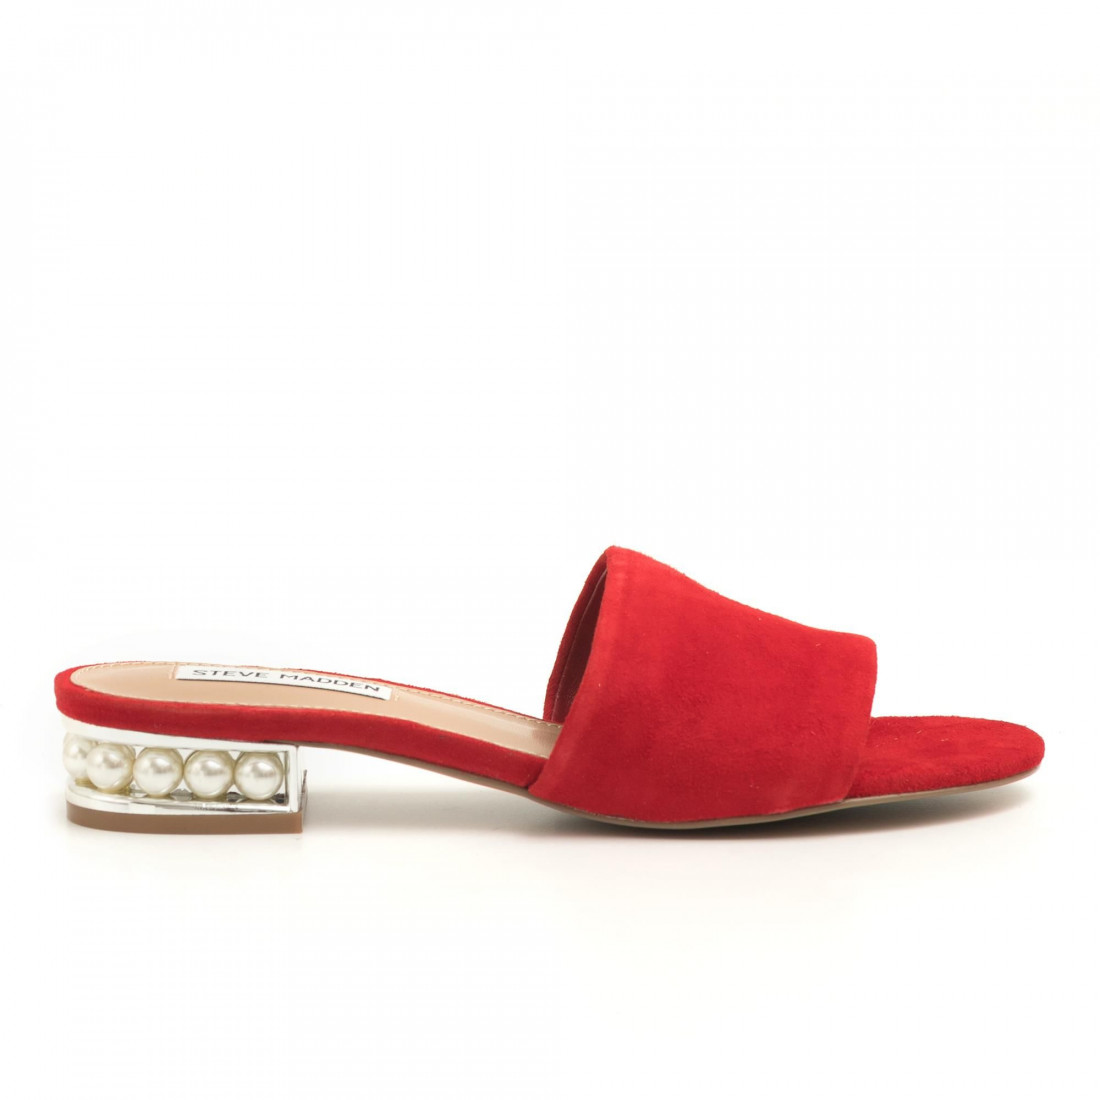 Red suede flat sandals with decorated heels